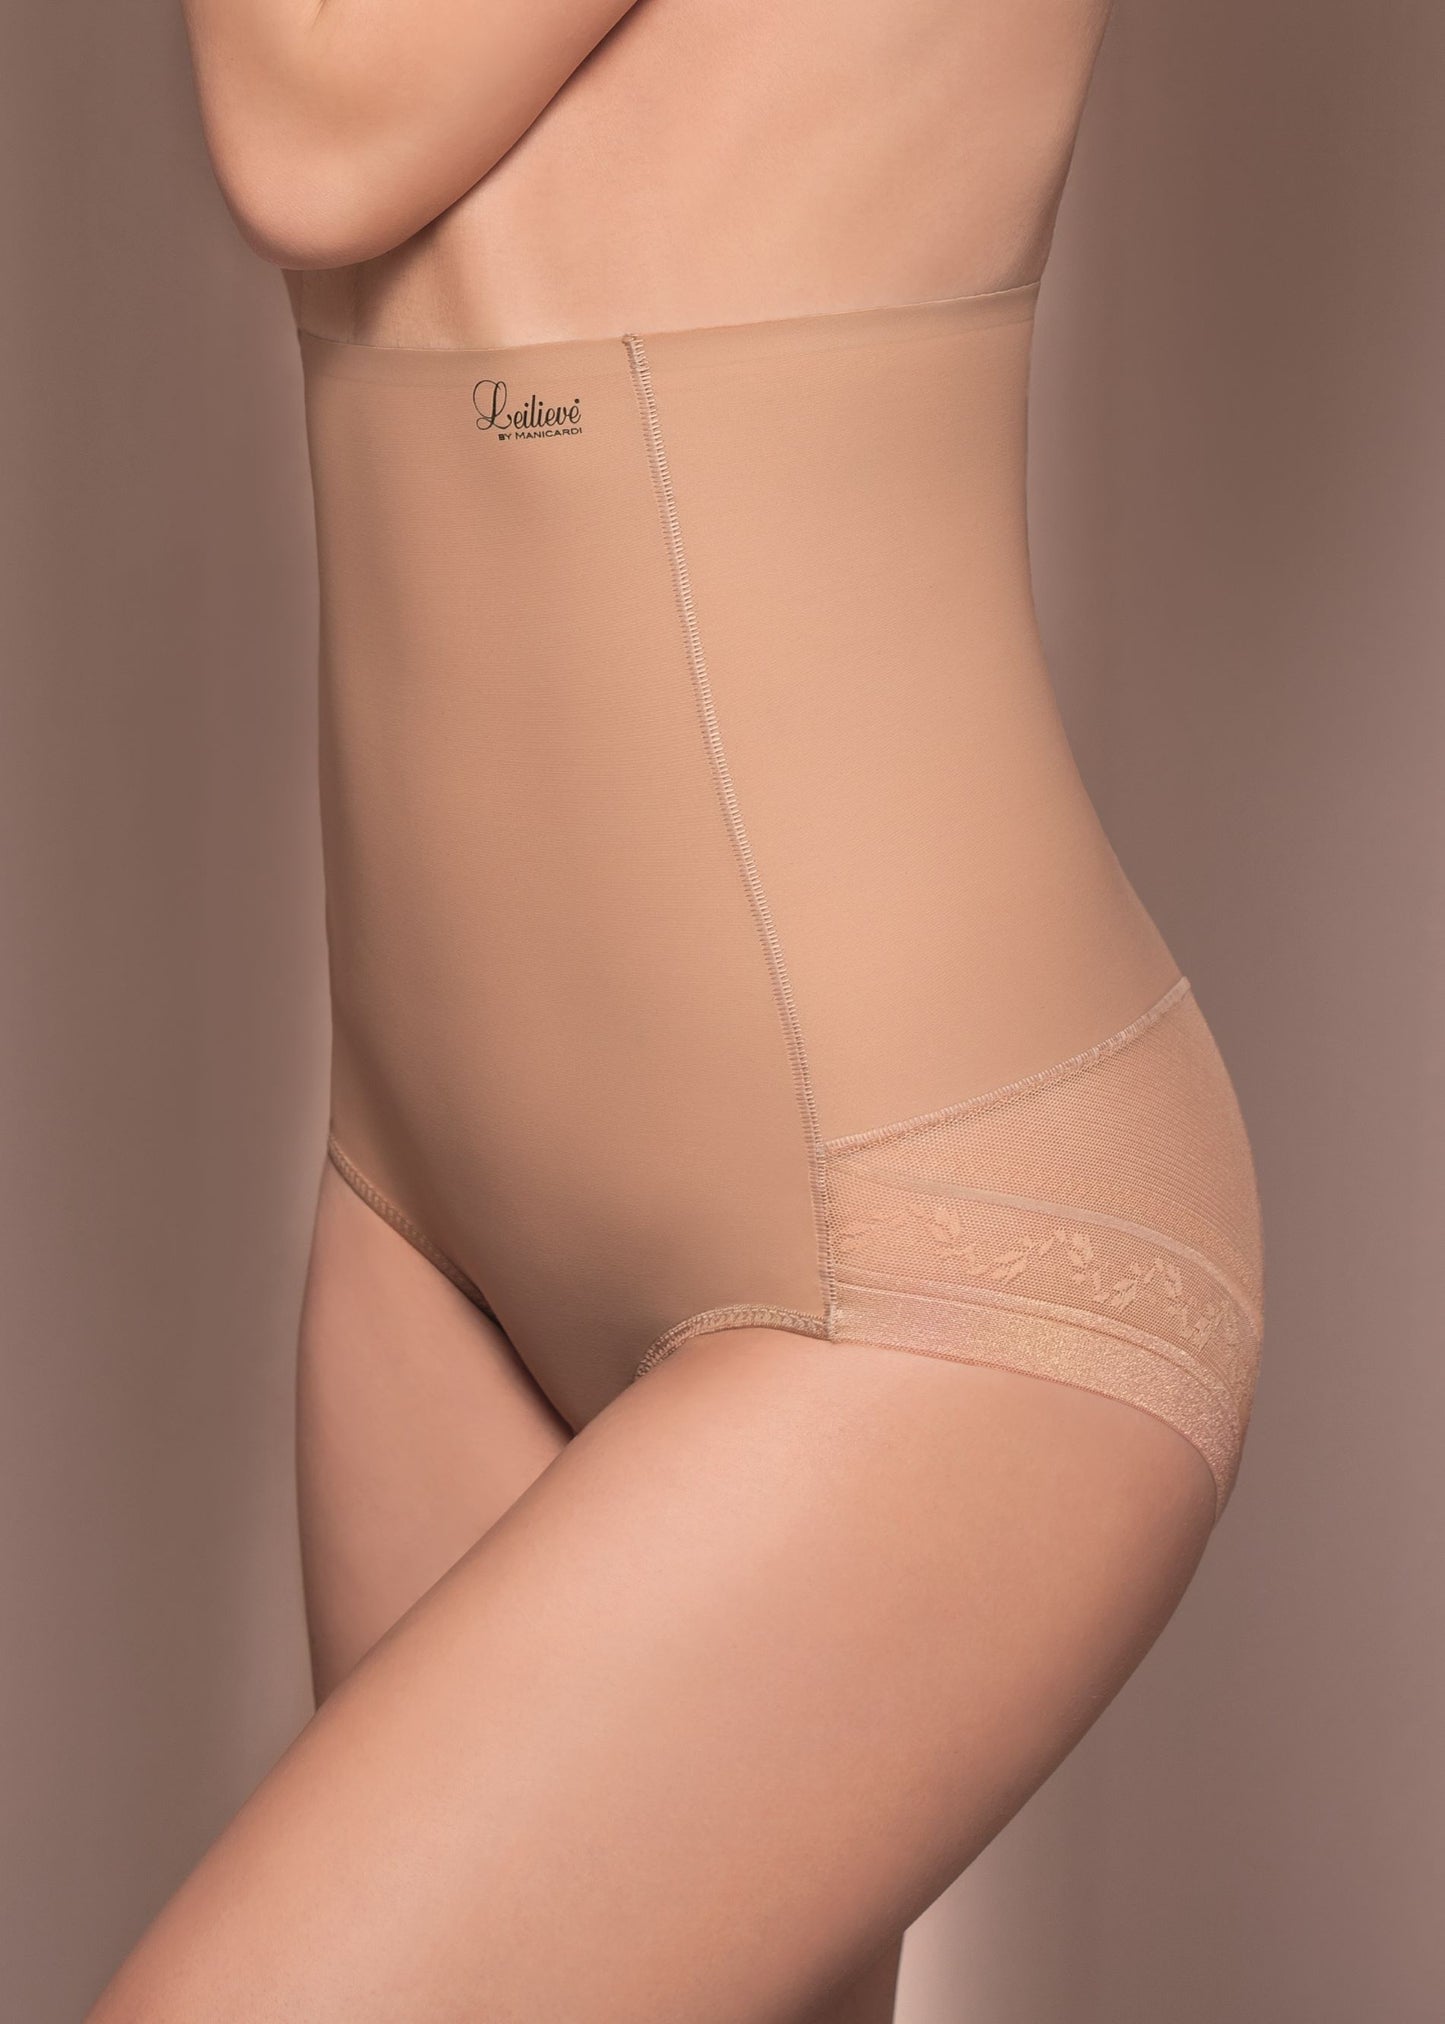 Elegant, shaping high-waisted shorts from the Sculpt line by Leilieve from Italy.